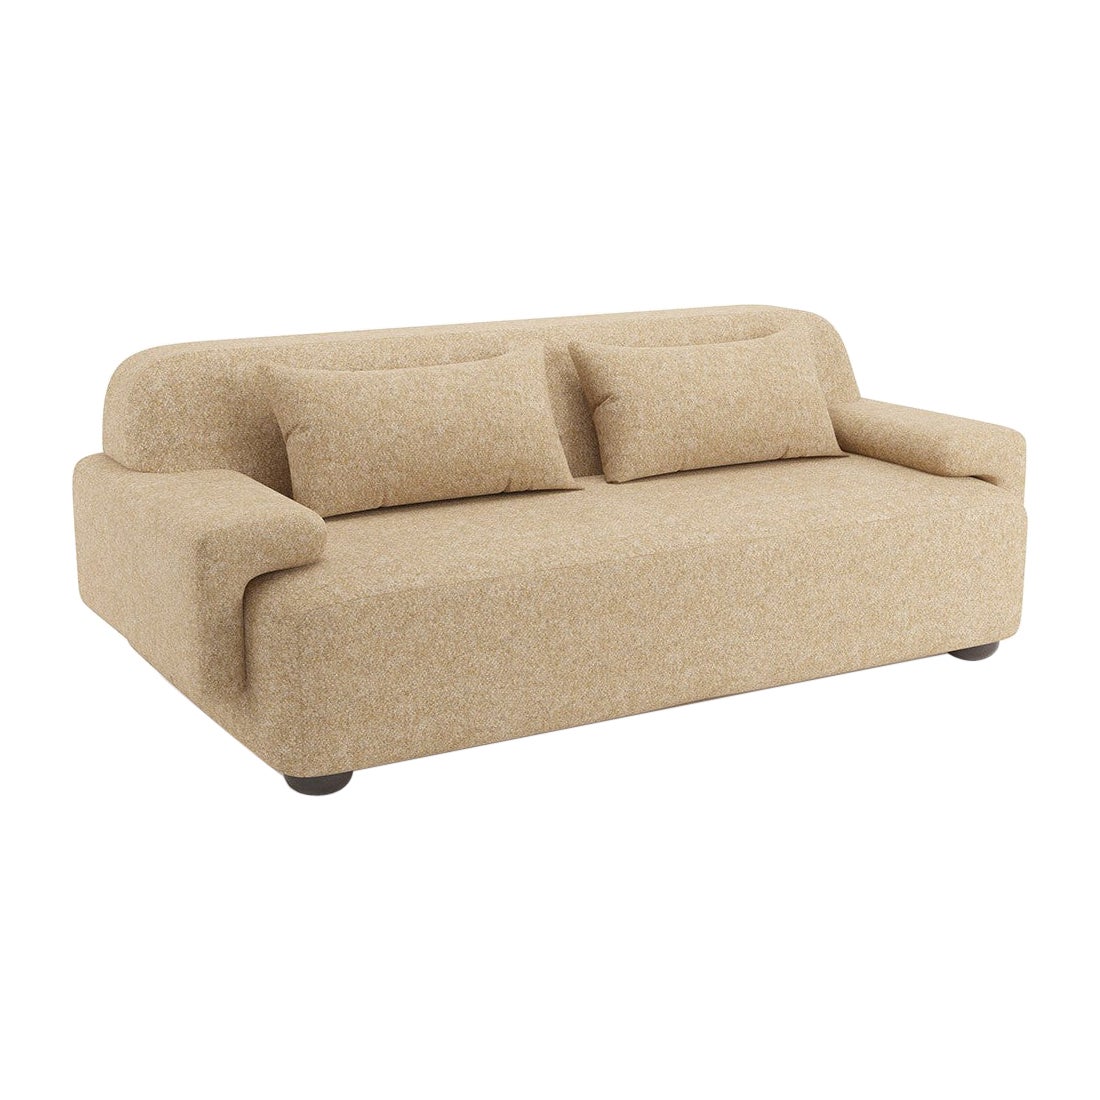 Popus Editions Lena 2.5 Seater Sofa in Saffron Antwerp Linen Upholstery For Sale